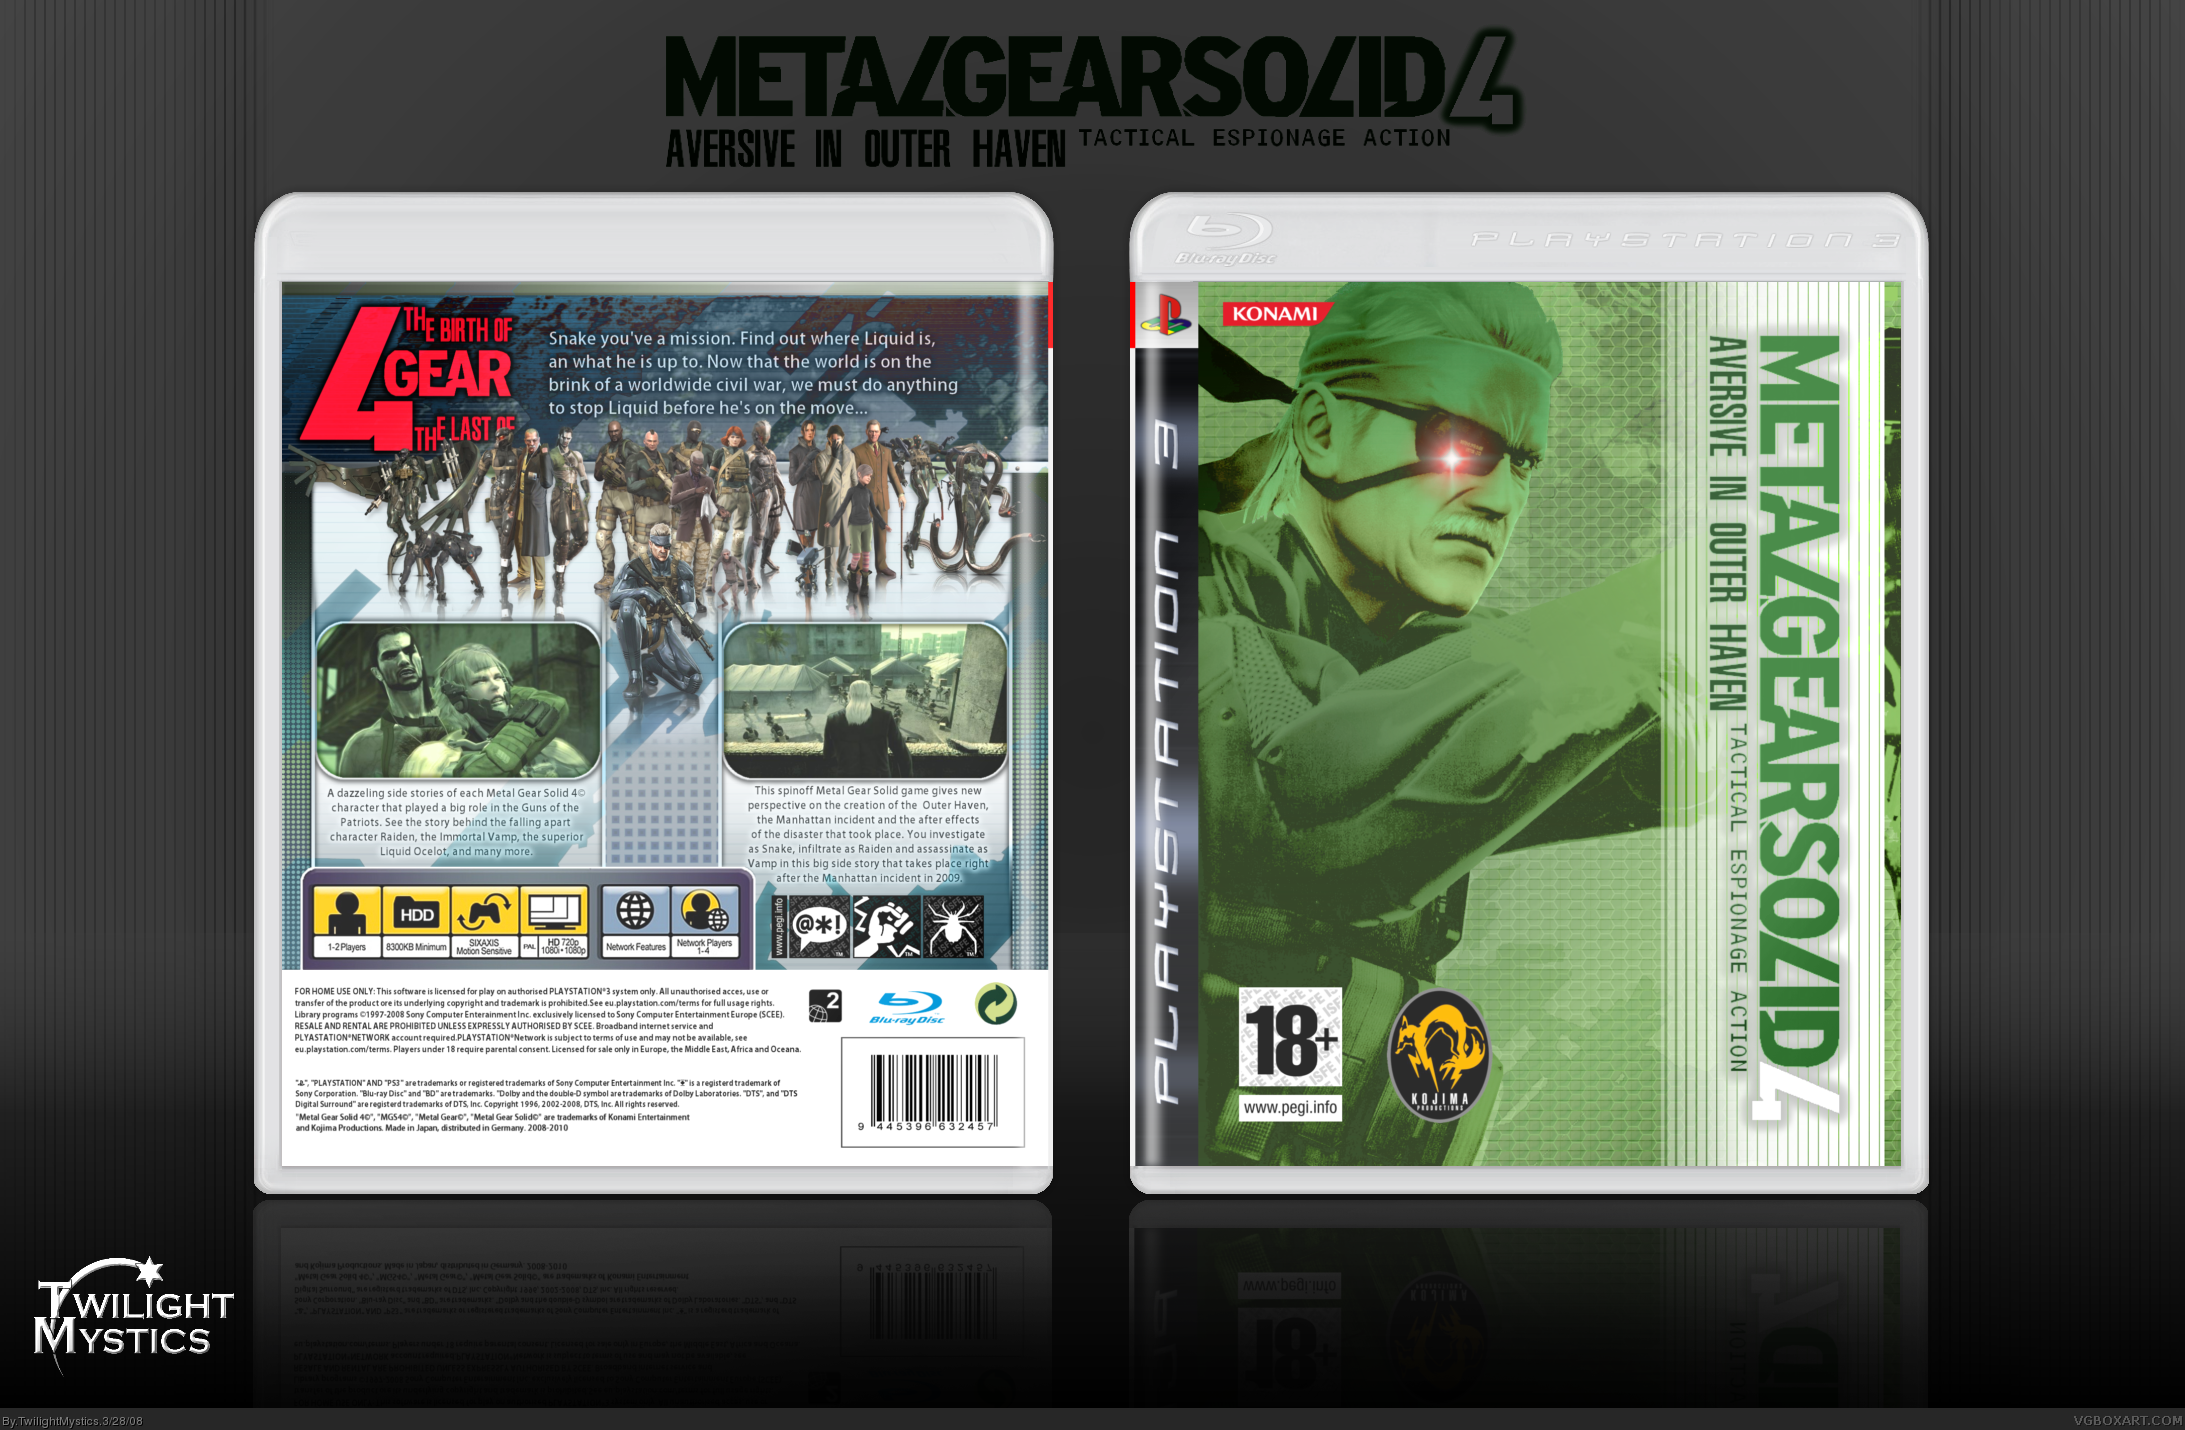 Metal Gear Solid 4: Aversive In Outer Haven box cover